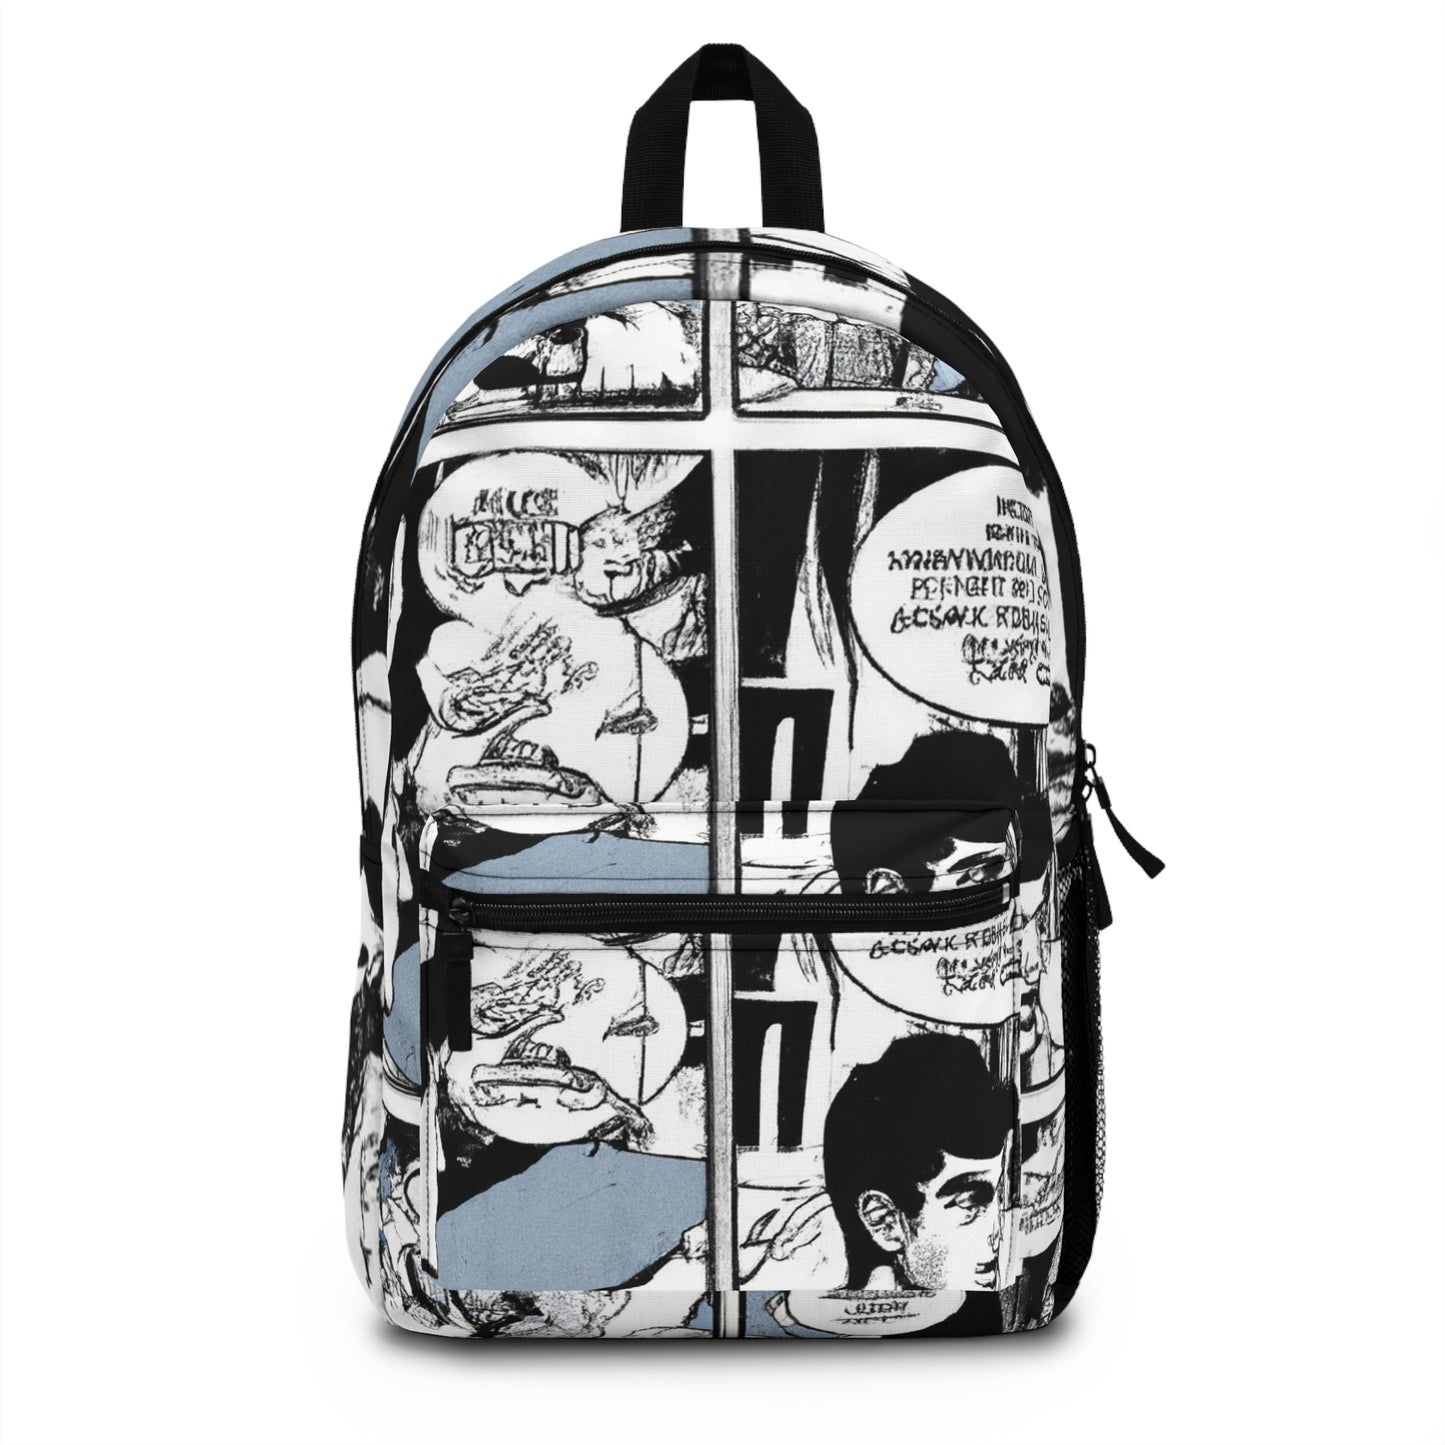 The Amazing Coolman! - Comic Book Backpack